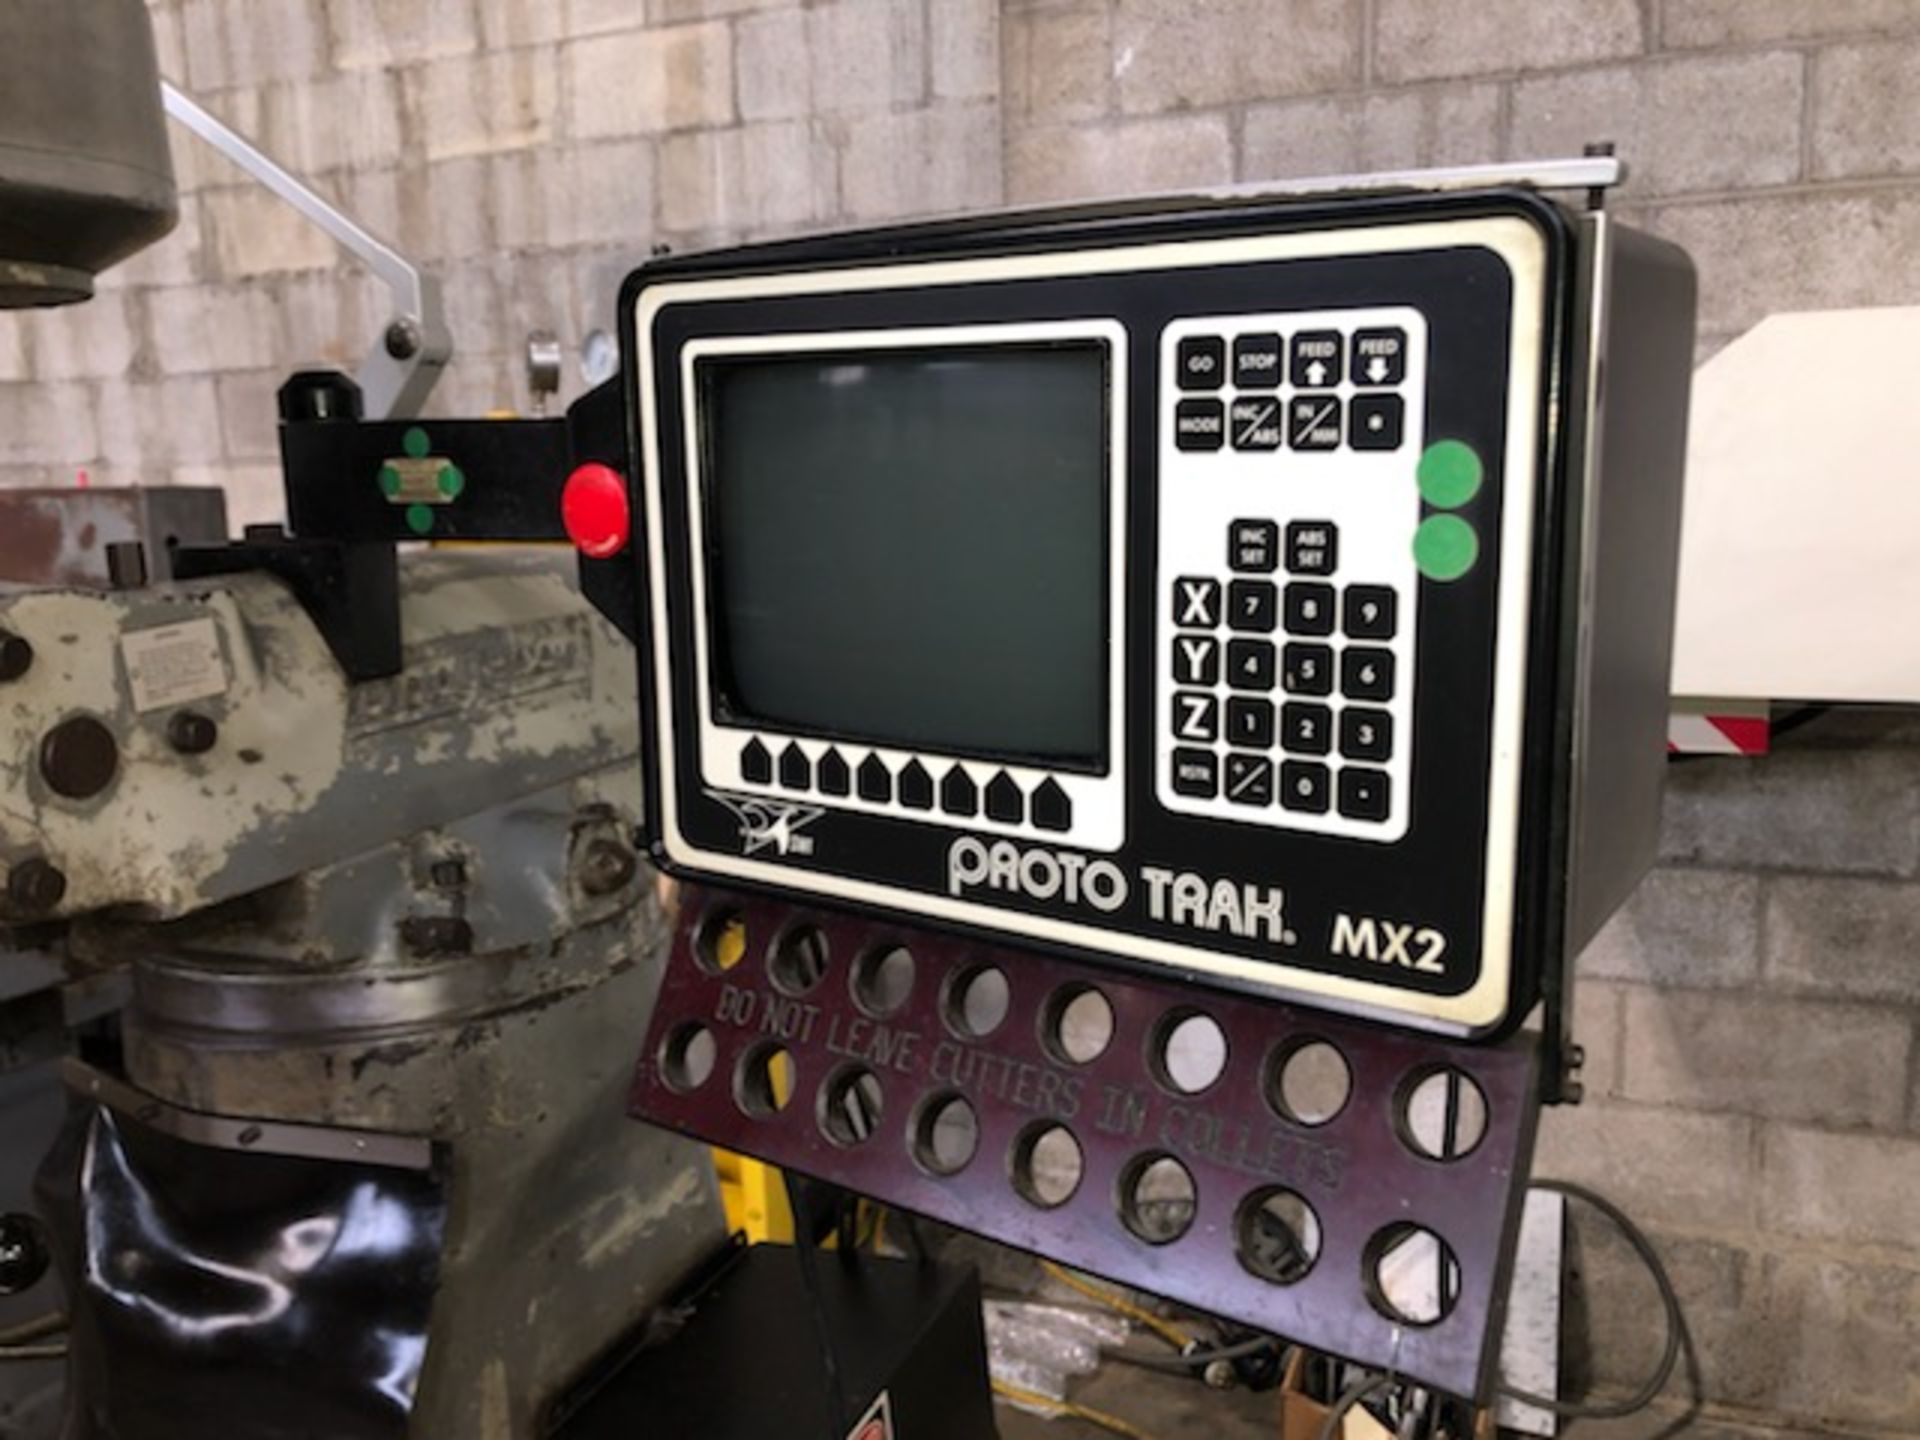 BRIDGEPORT SERIES 1 CNC MILL WITH SWI SOUTHWEST INDUSTRIES PROTO TRAK MX-2, 2- AXIS CNC CONTROL - Image 4 of 7